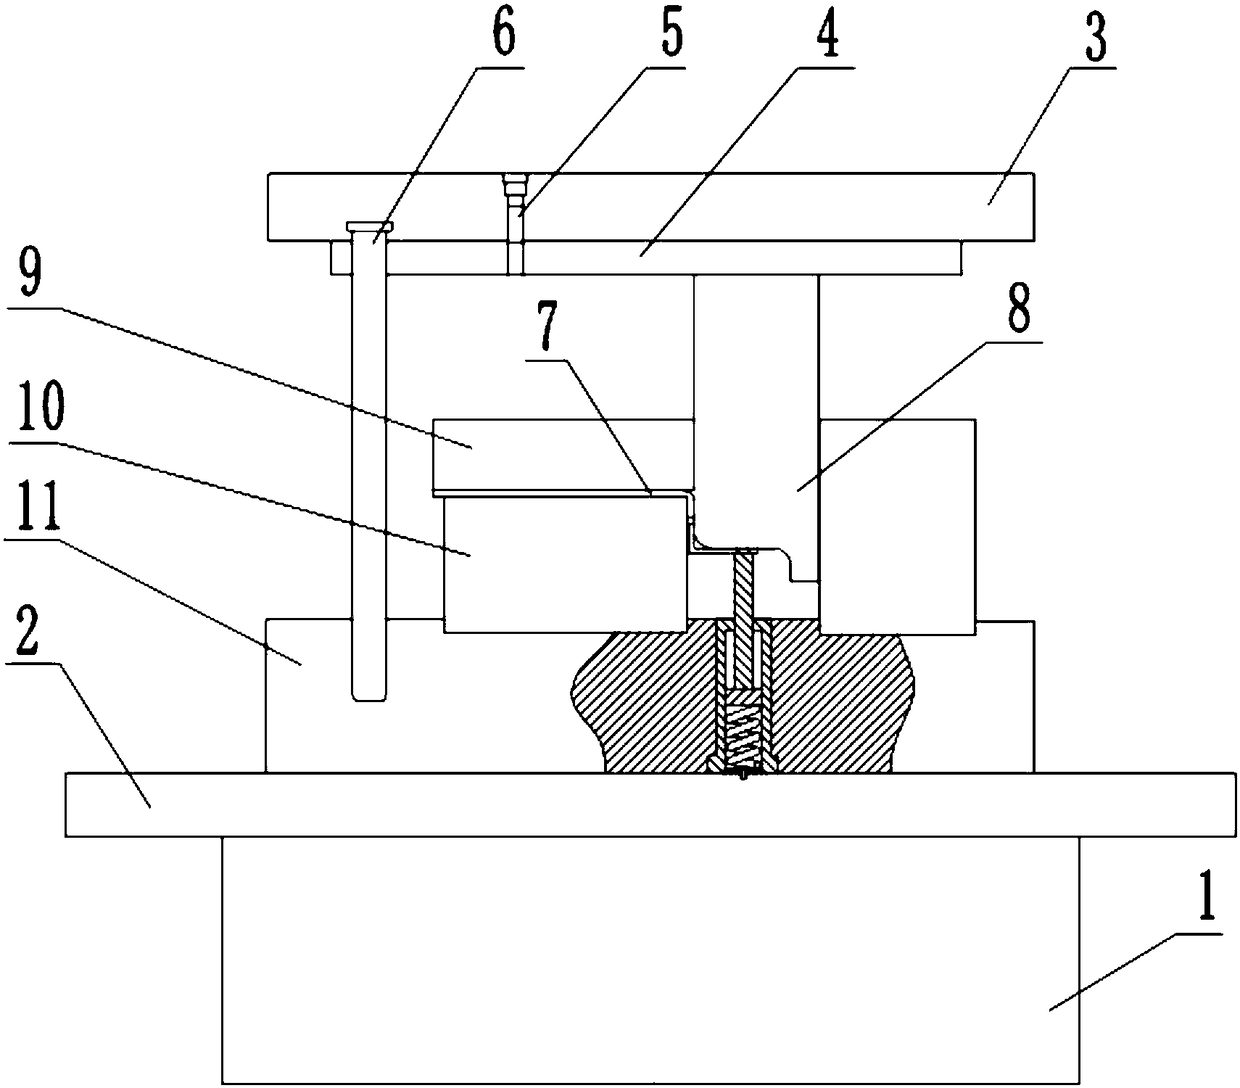 Flanging die with automatic jacking mechanism